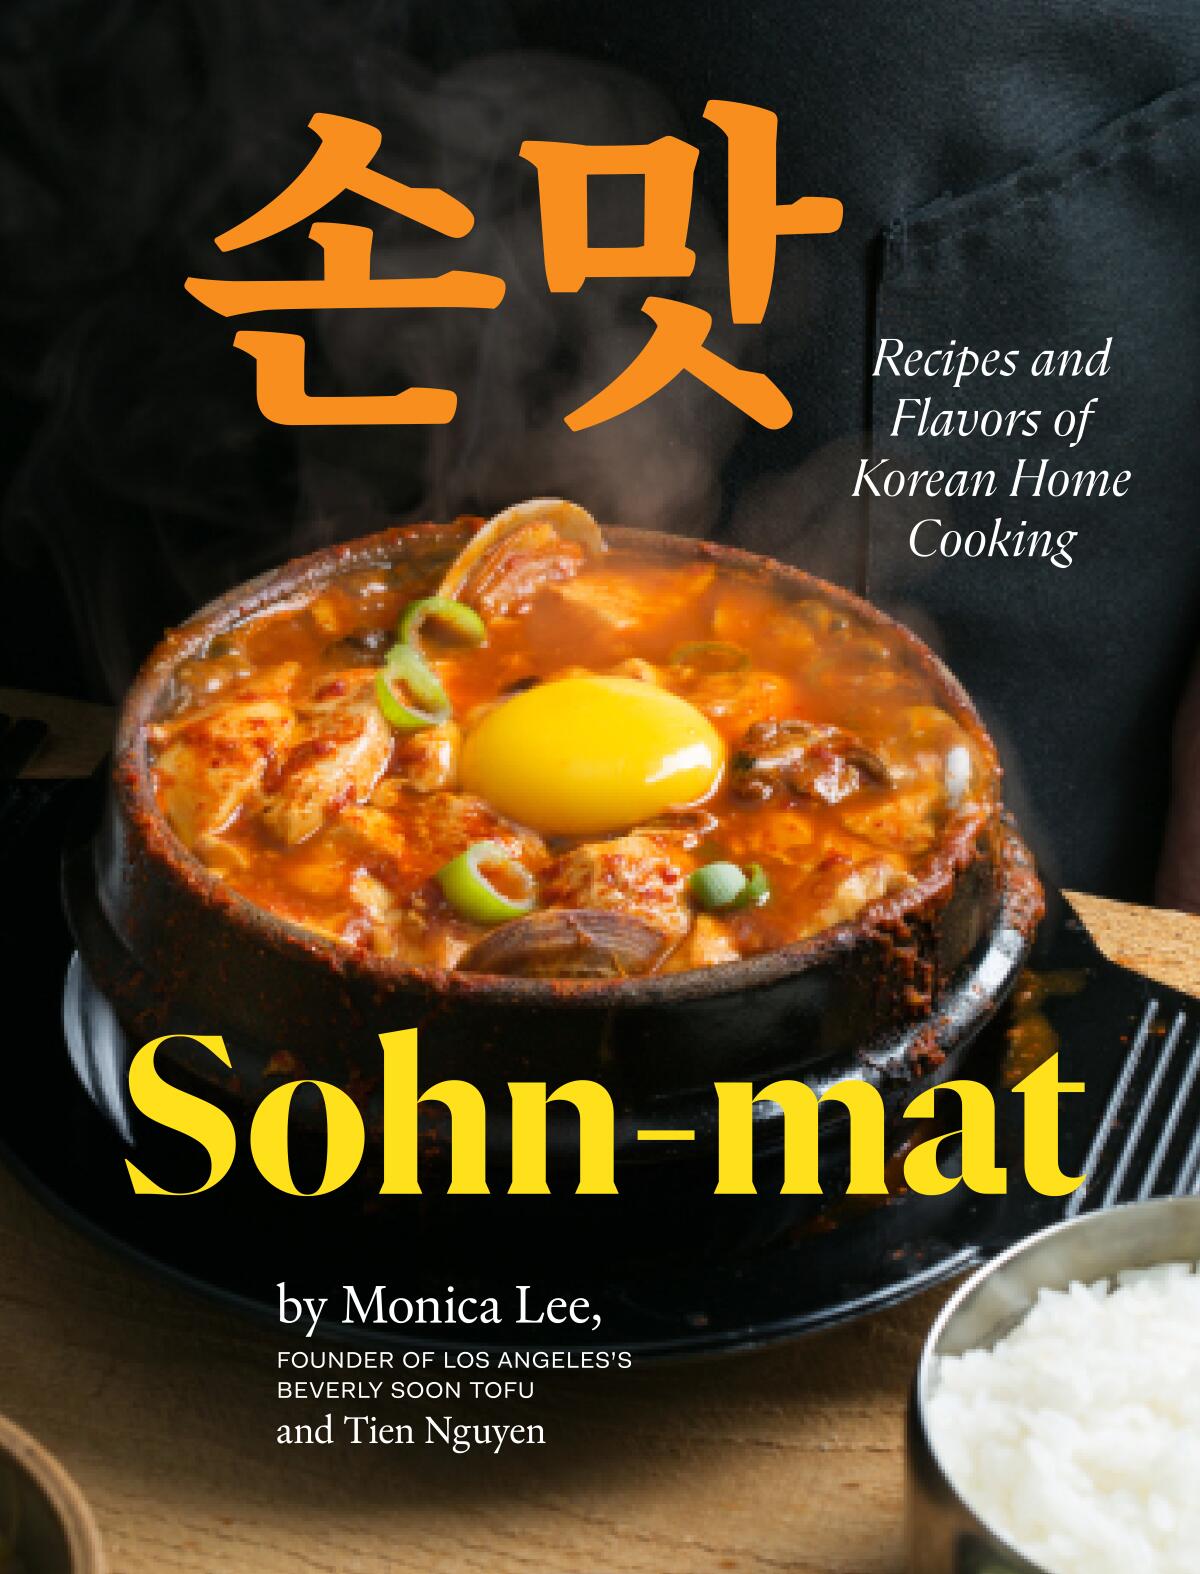 The cover for "Sohn-mat" cookbook by Monica Lee and Tien Nguyen.